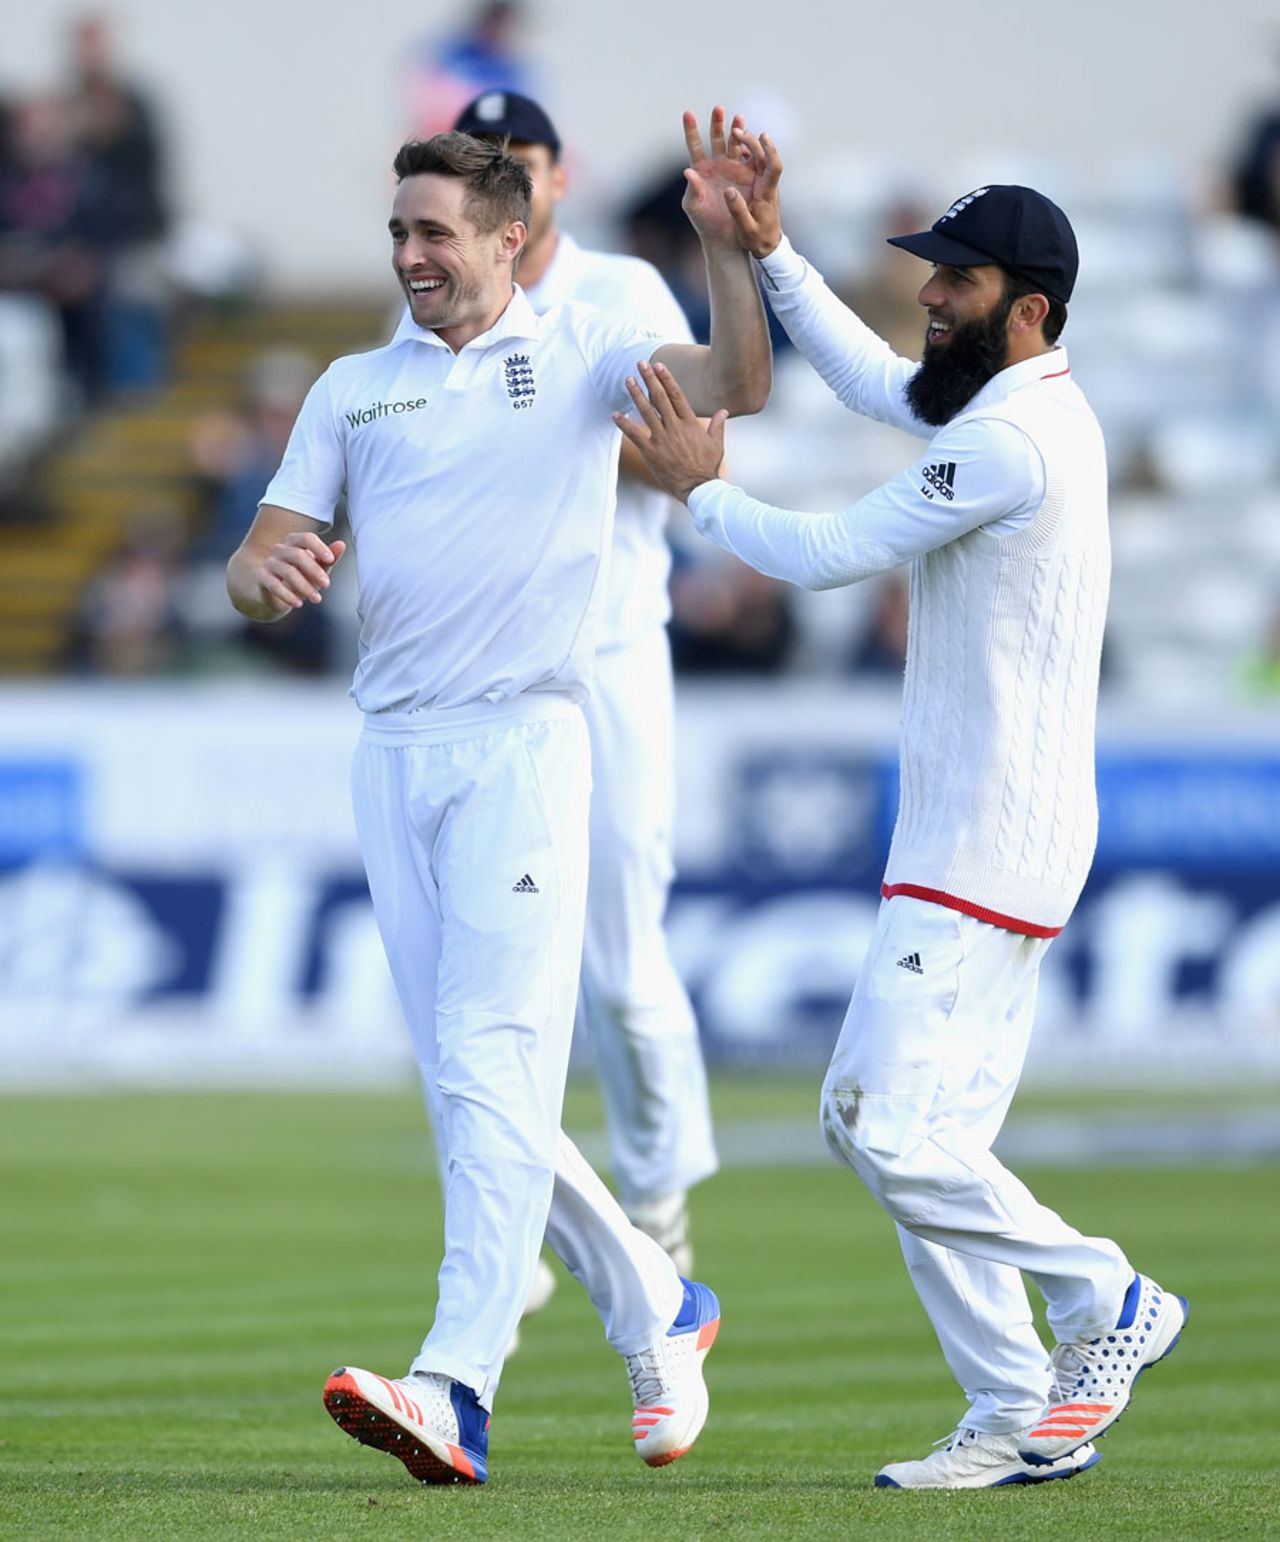 Chris Woakes gets a high five from Moeen Ali, England v Sri Lanka, 2nd Test, Chester-le-Street, 2nd day, May 28, 2016